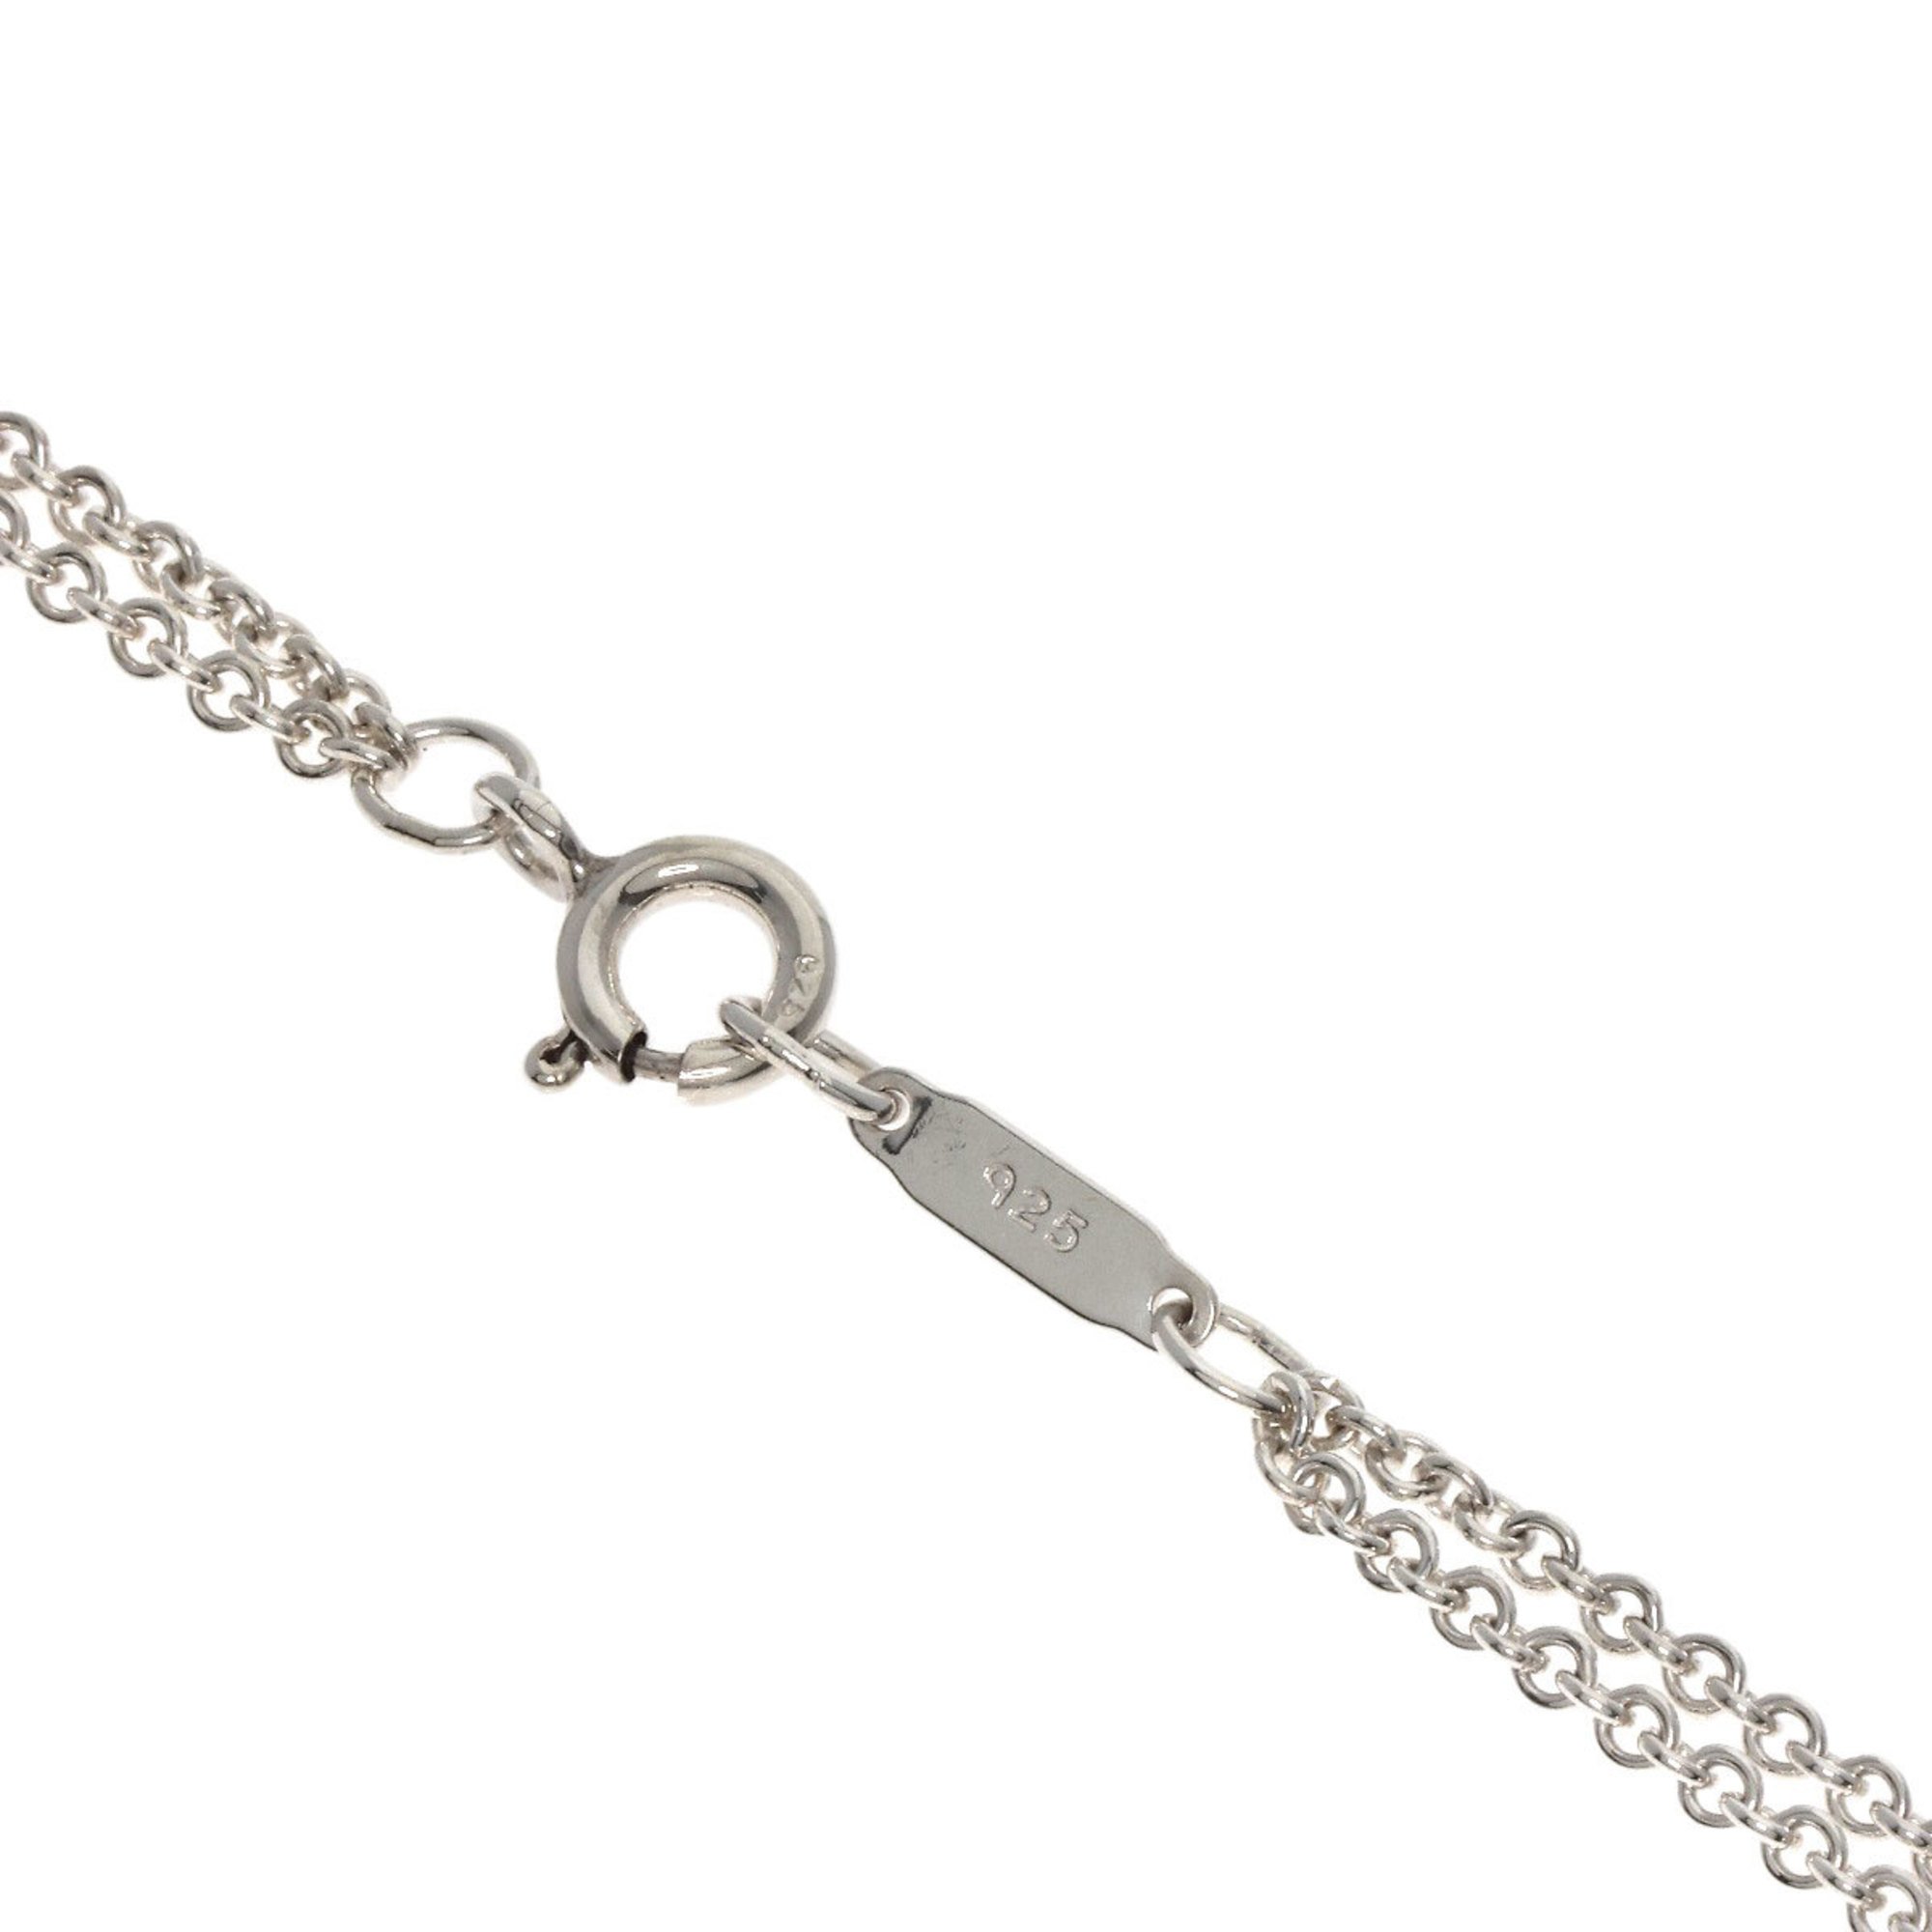 Tiffany infinity necklace silver ladies